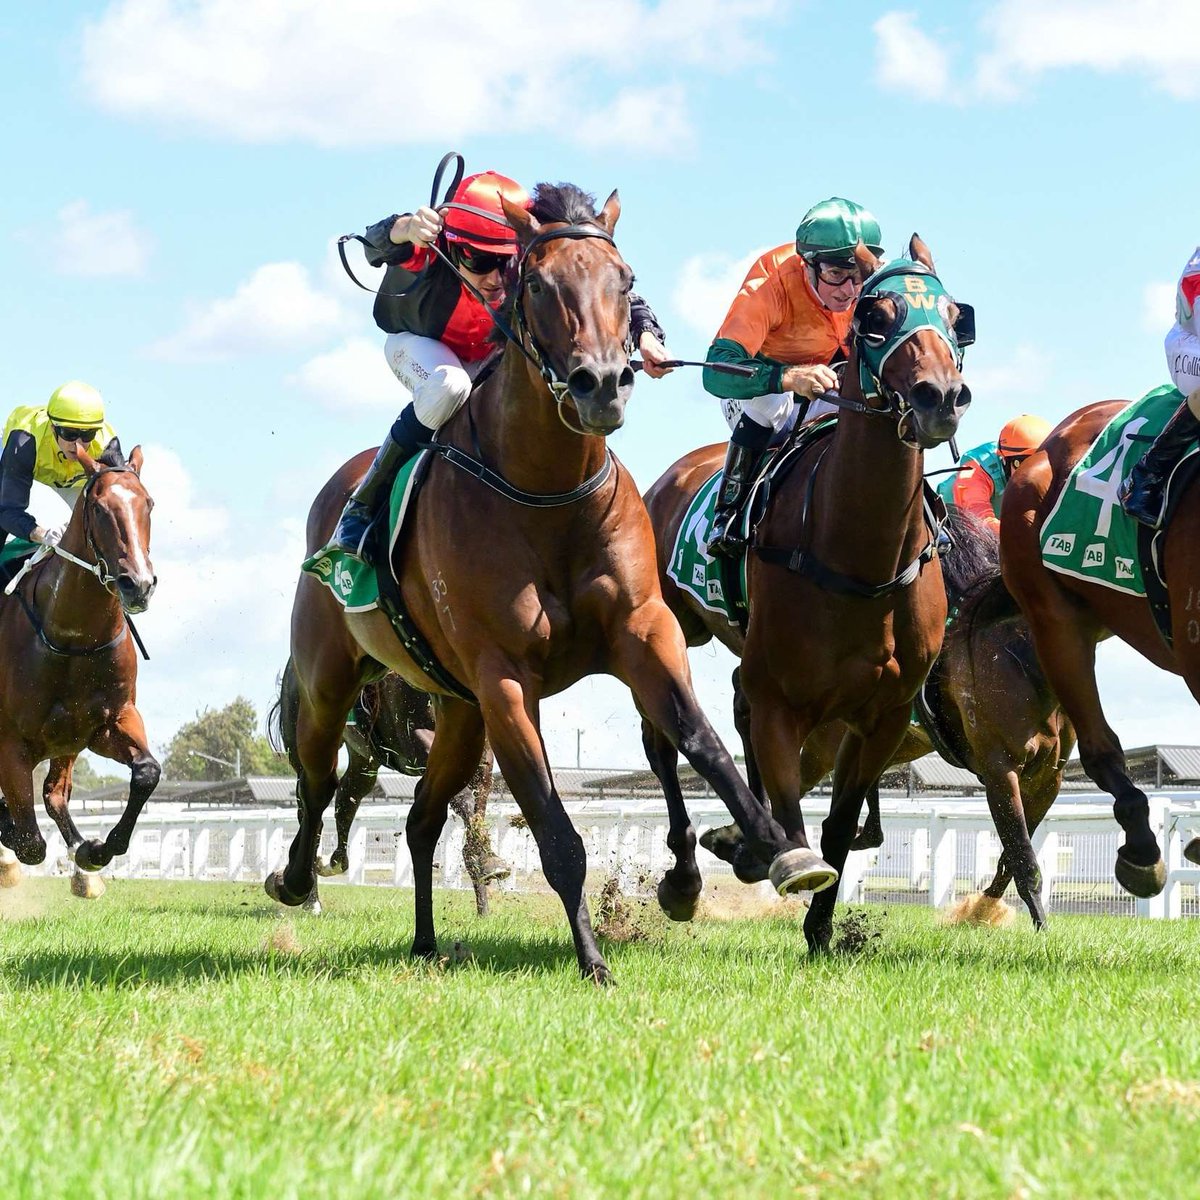 🎙️ 'Sat on speed and kept finding under pressure last start. Draws to get a good run in transit and should be hard to run down on this track.' Gibbo has found some value for today. Jump over to the Gibbo's Tips page now and check it out 👉 bit.ly/3ghsCjl